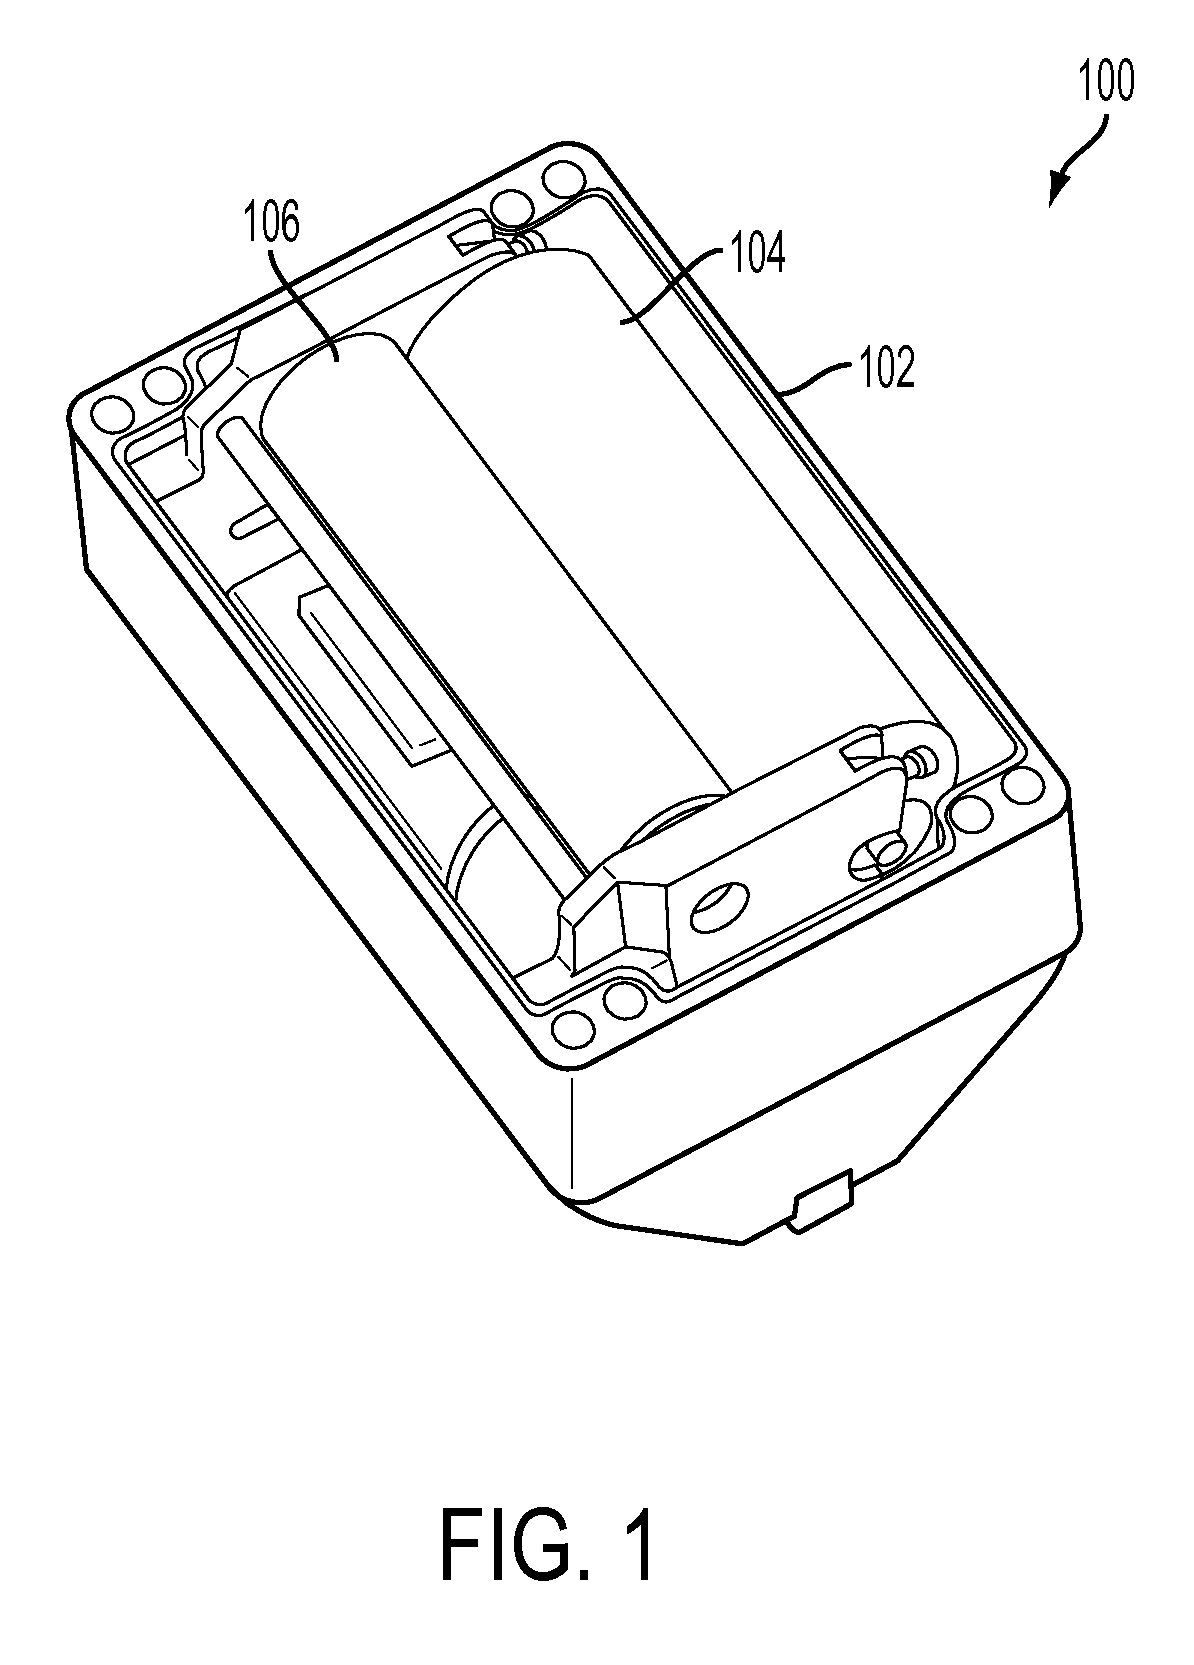 Apparatus and method to generate X-rays by contact electrification